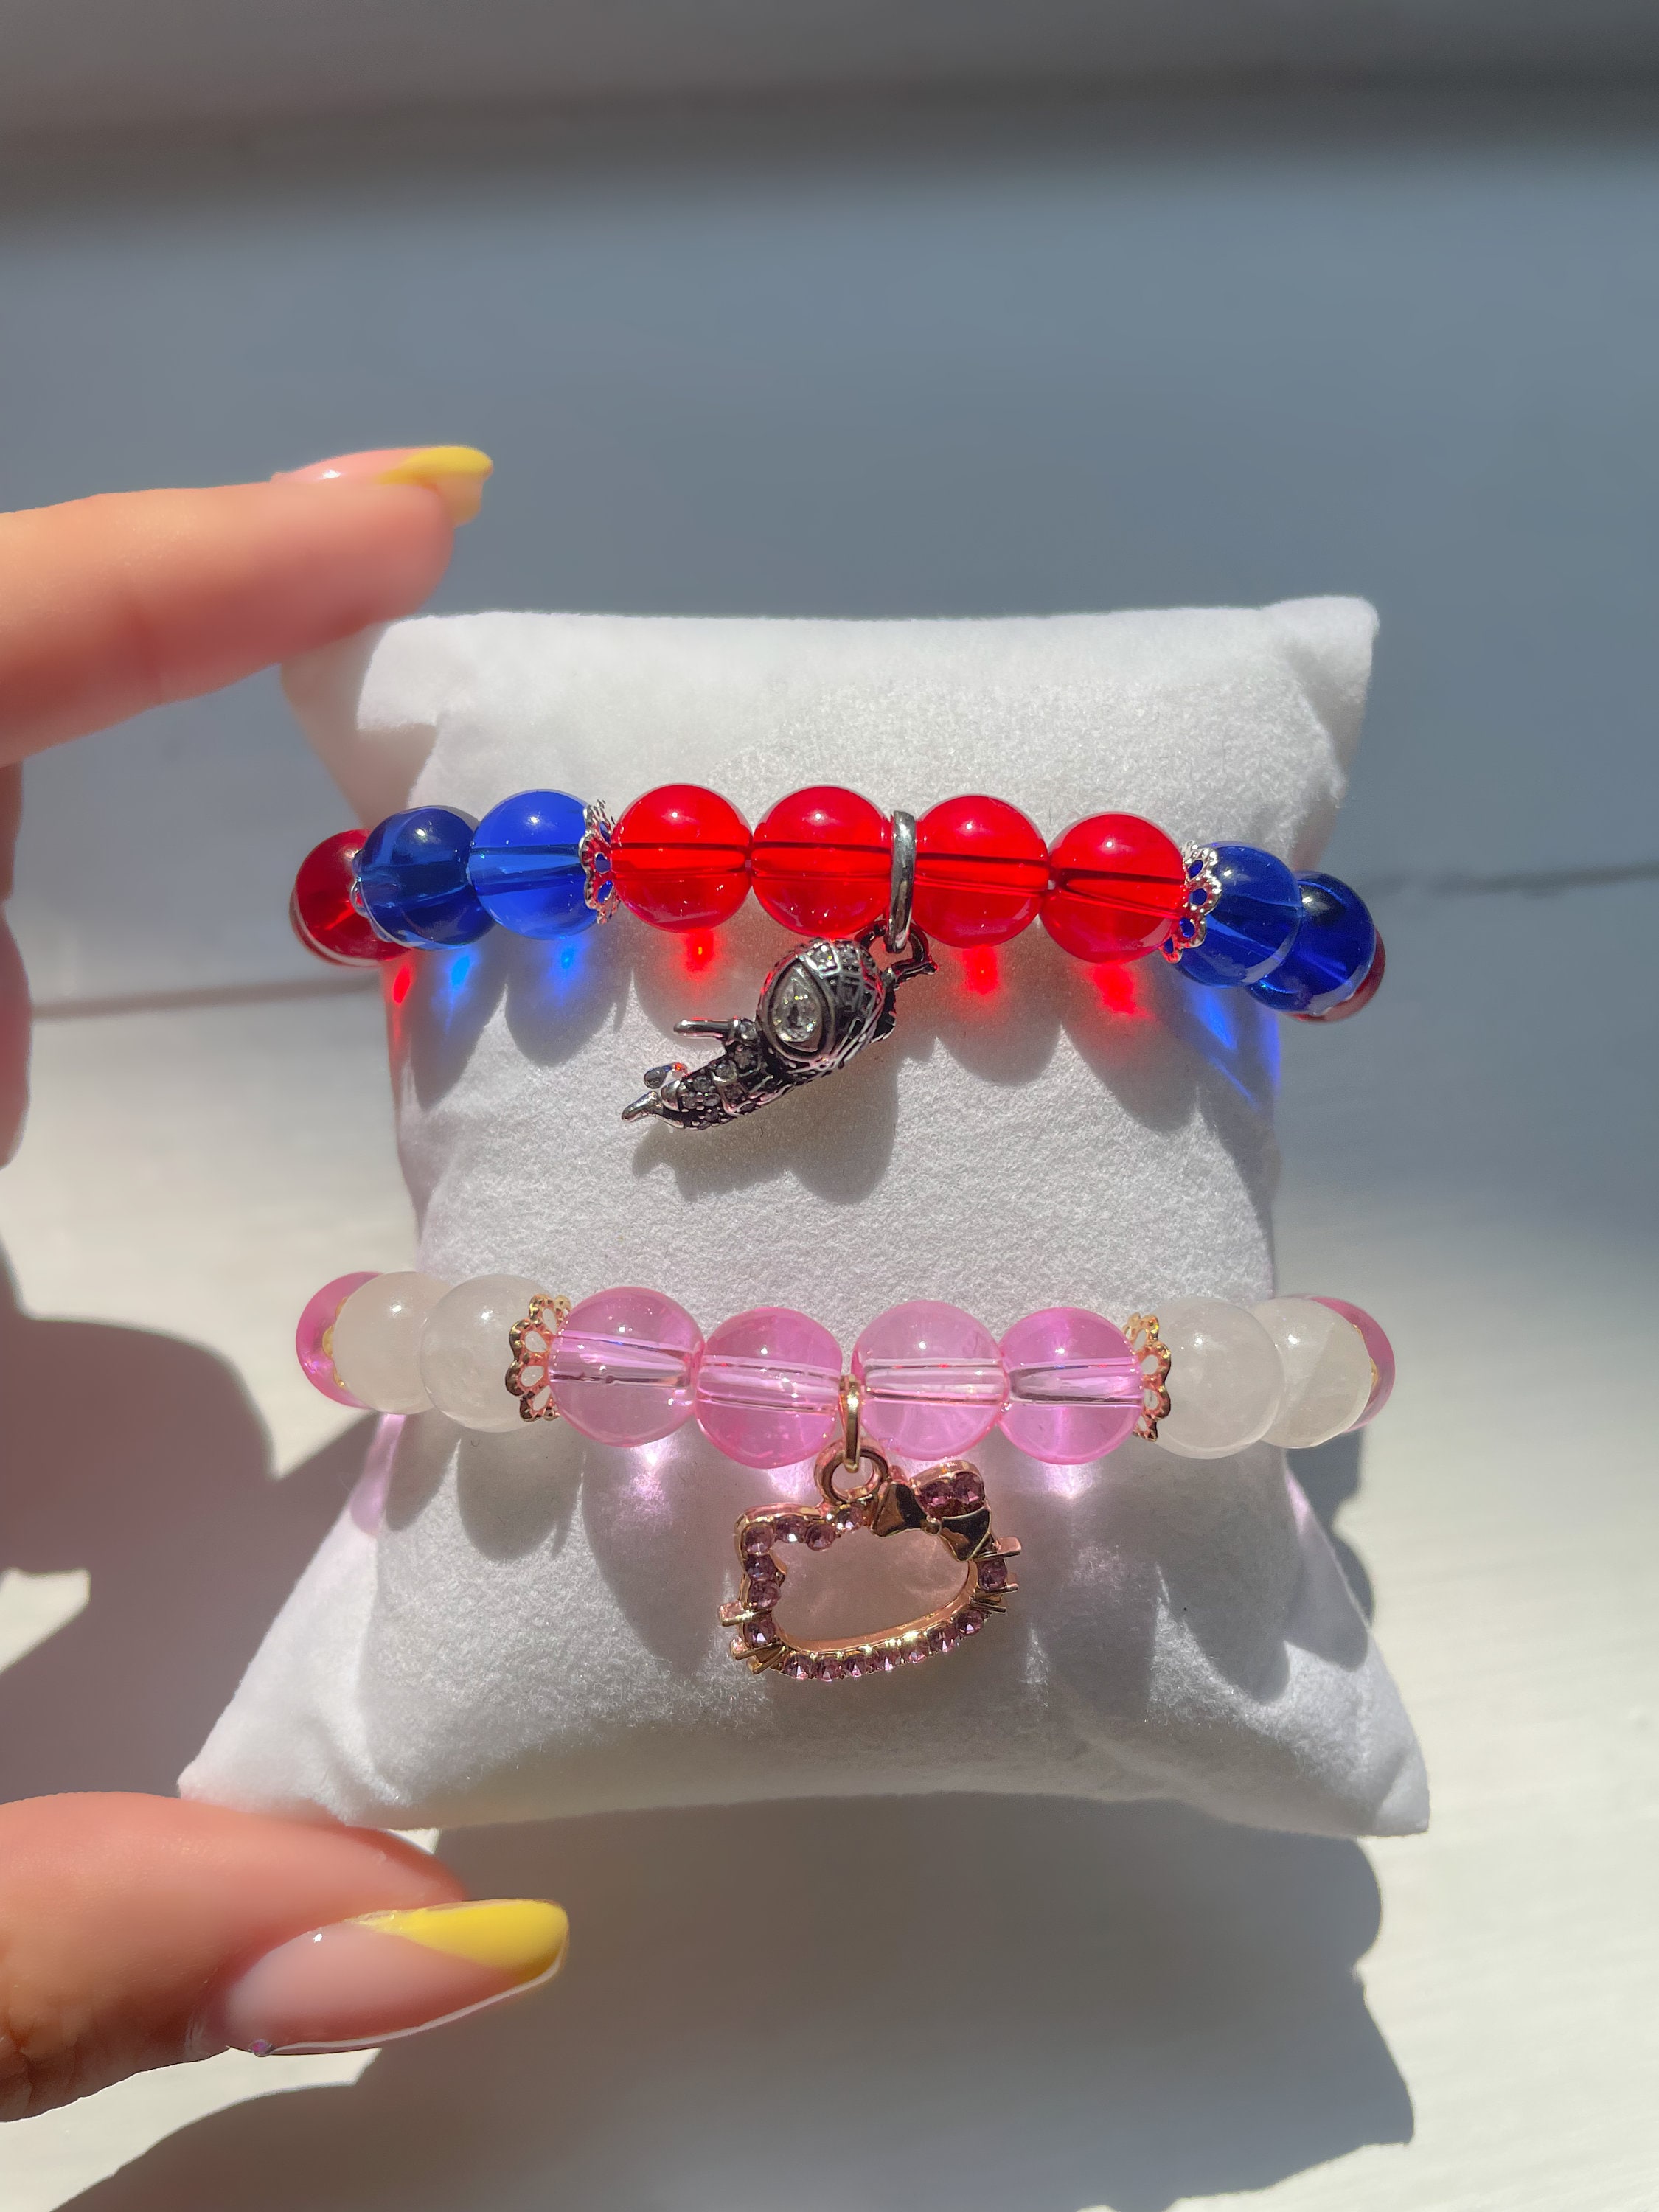 cute matching bracelets 💕 hello kitty and spider man #hellokitty #spi, Matching Bracelet